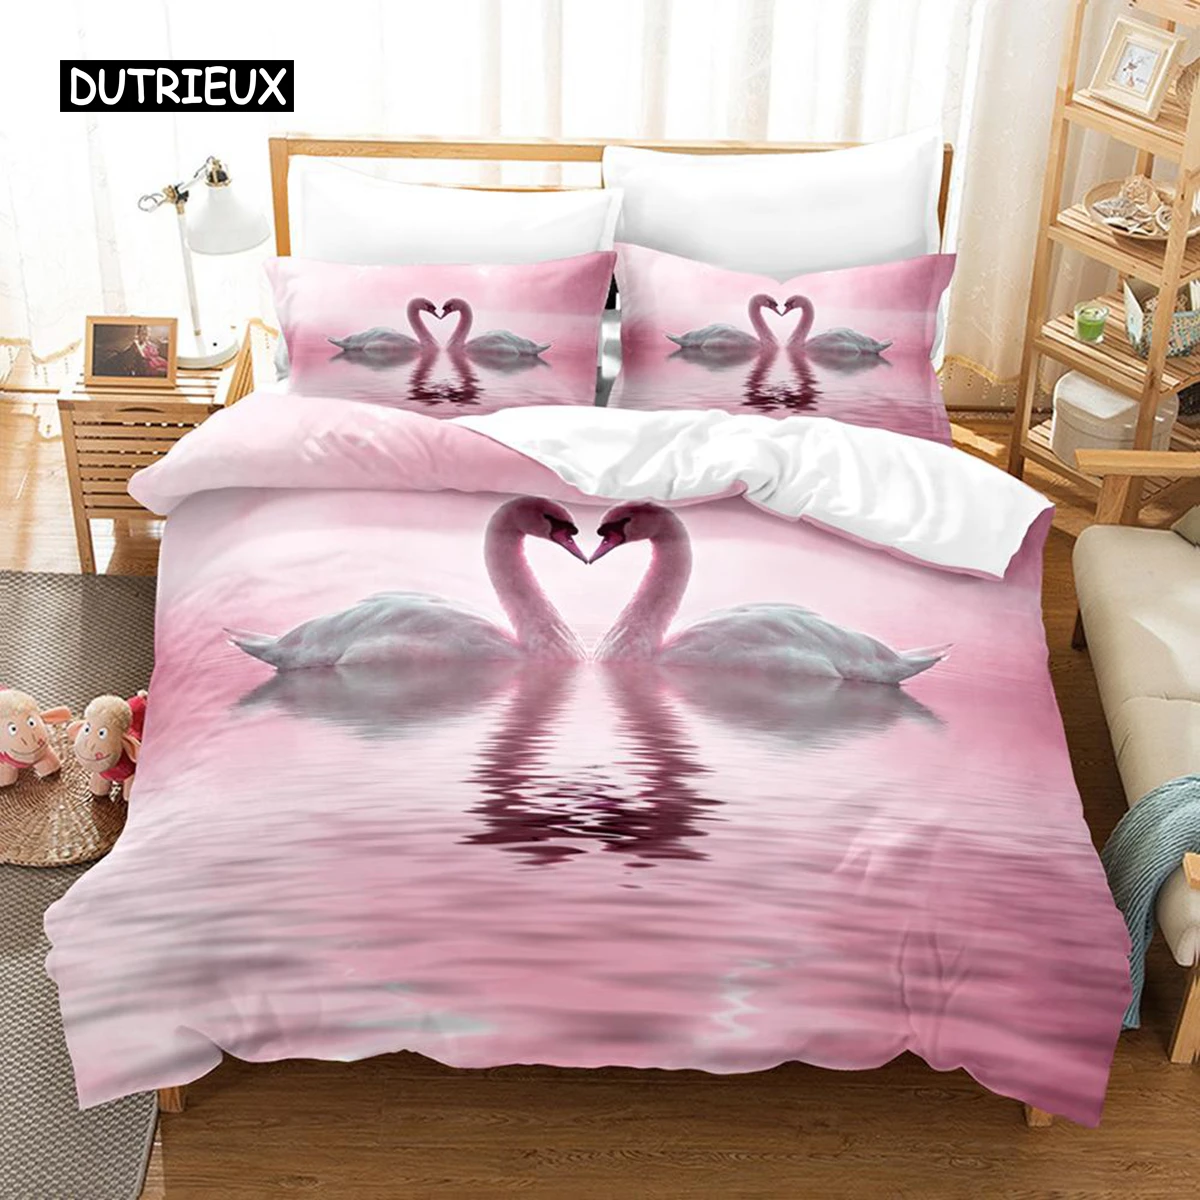 

Swan Duvet Cover Set Twin Swan Bedding Set Microfiber Queen King Size Birds Romantic Style Quilt Cover Wild Animals for Girl Boy